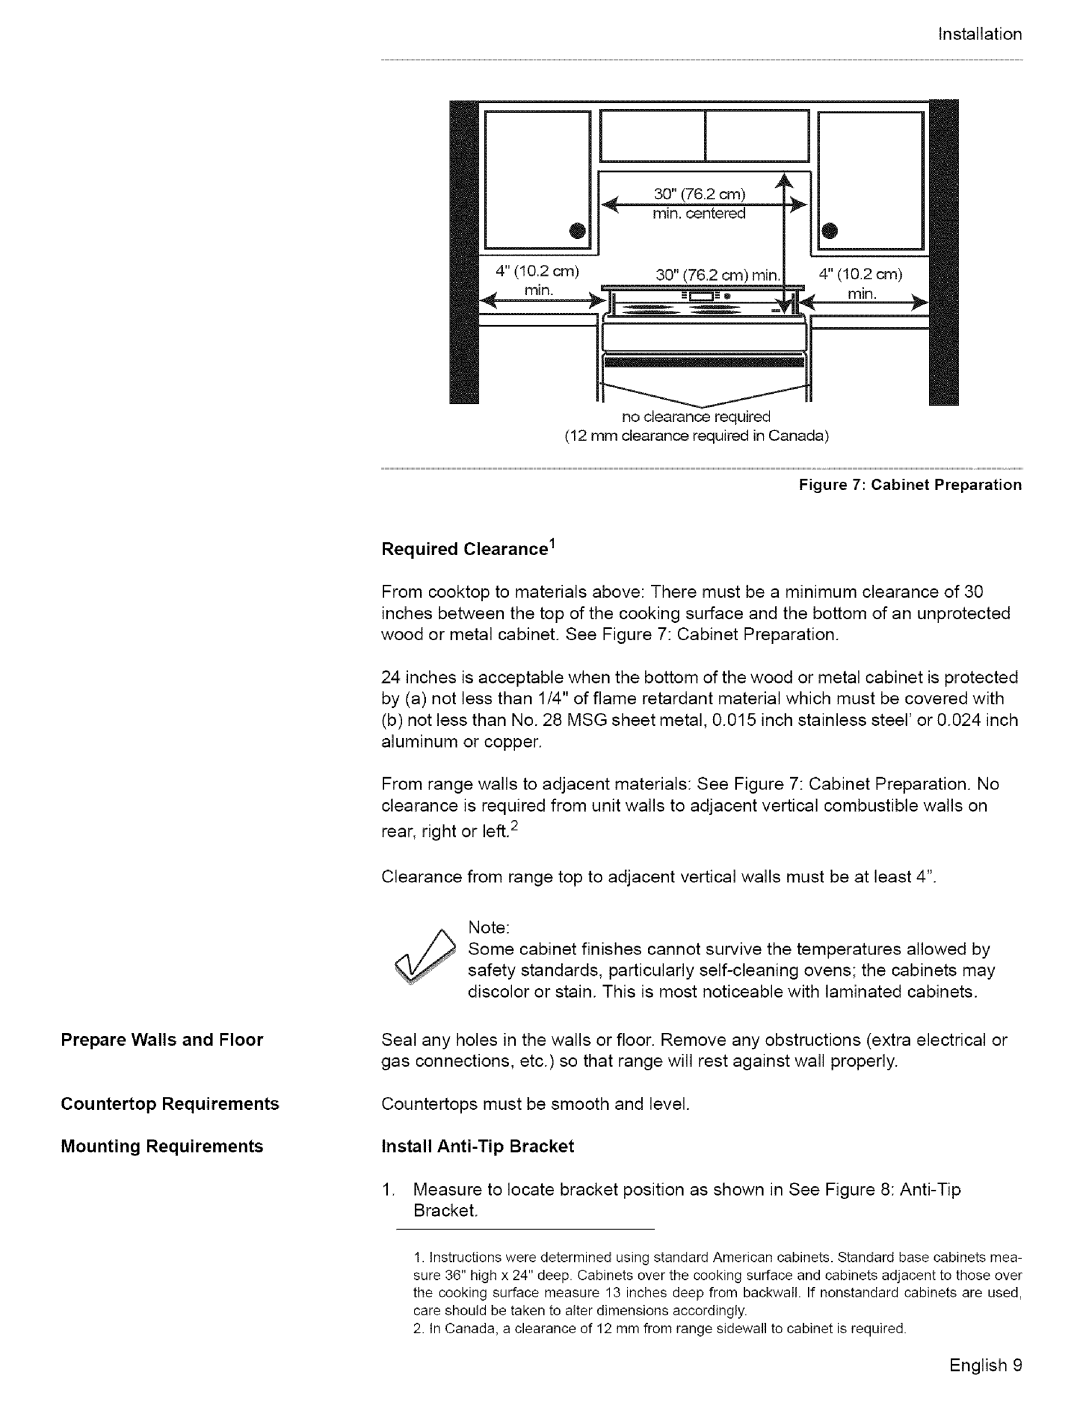 Bosch Appliances L0609466 manual Cabinet Preparation Required Clearance, Countertop Requirements, Mounting Requirements 